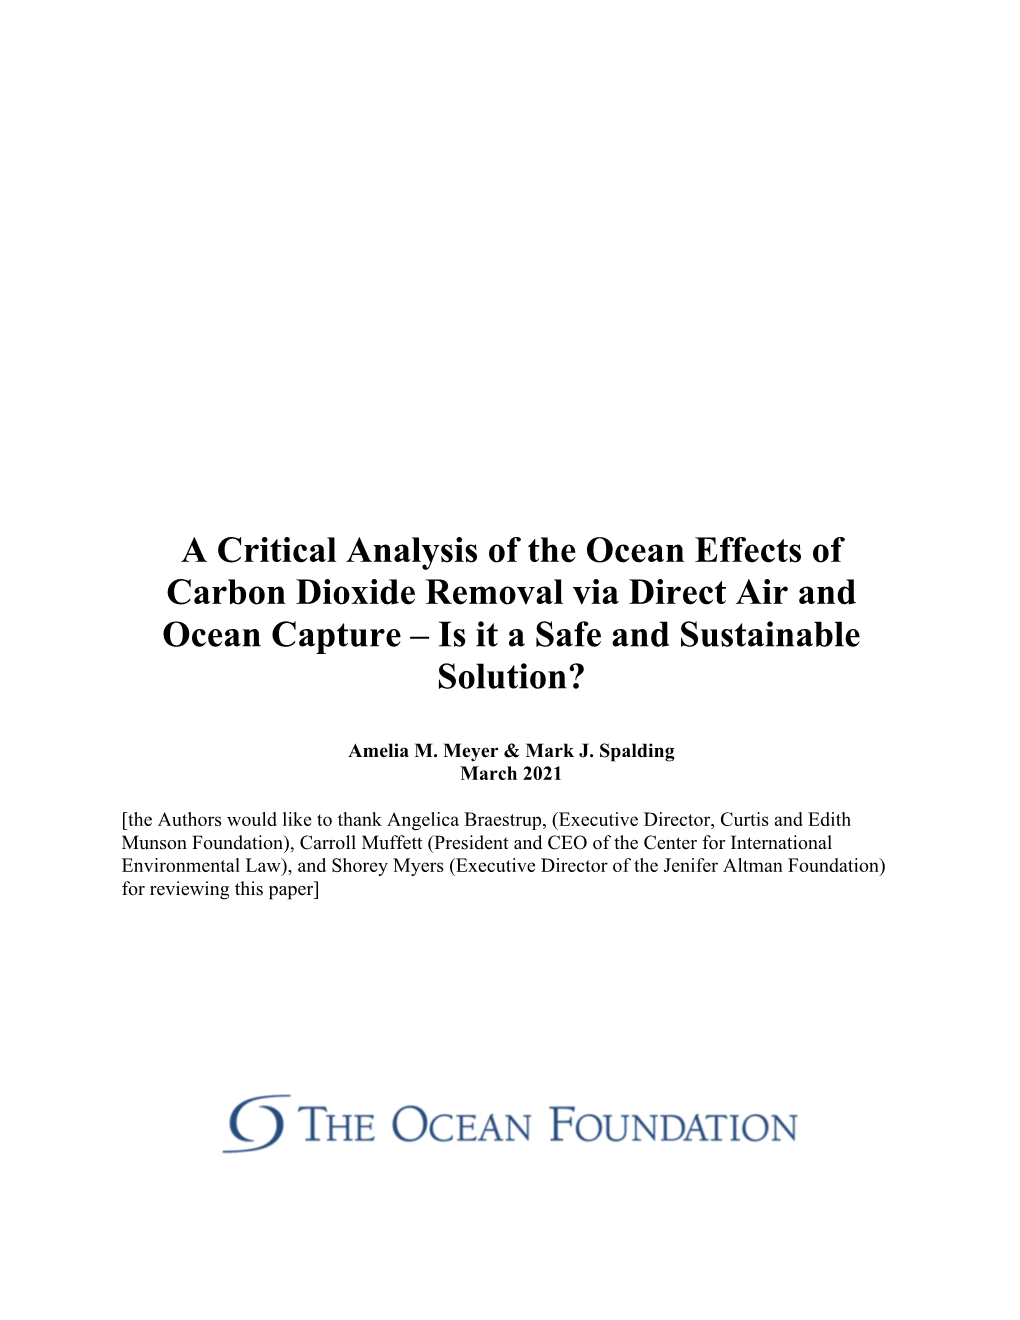 A Critical Analysis of the Ocean Effects of Carbon Dioxide Removal Via Direct Air and Ocean Capture – Is It a Safe and Sustainable Solution?